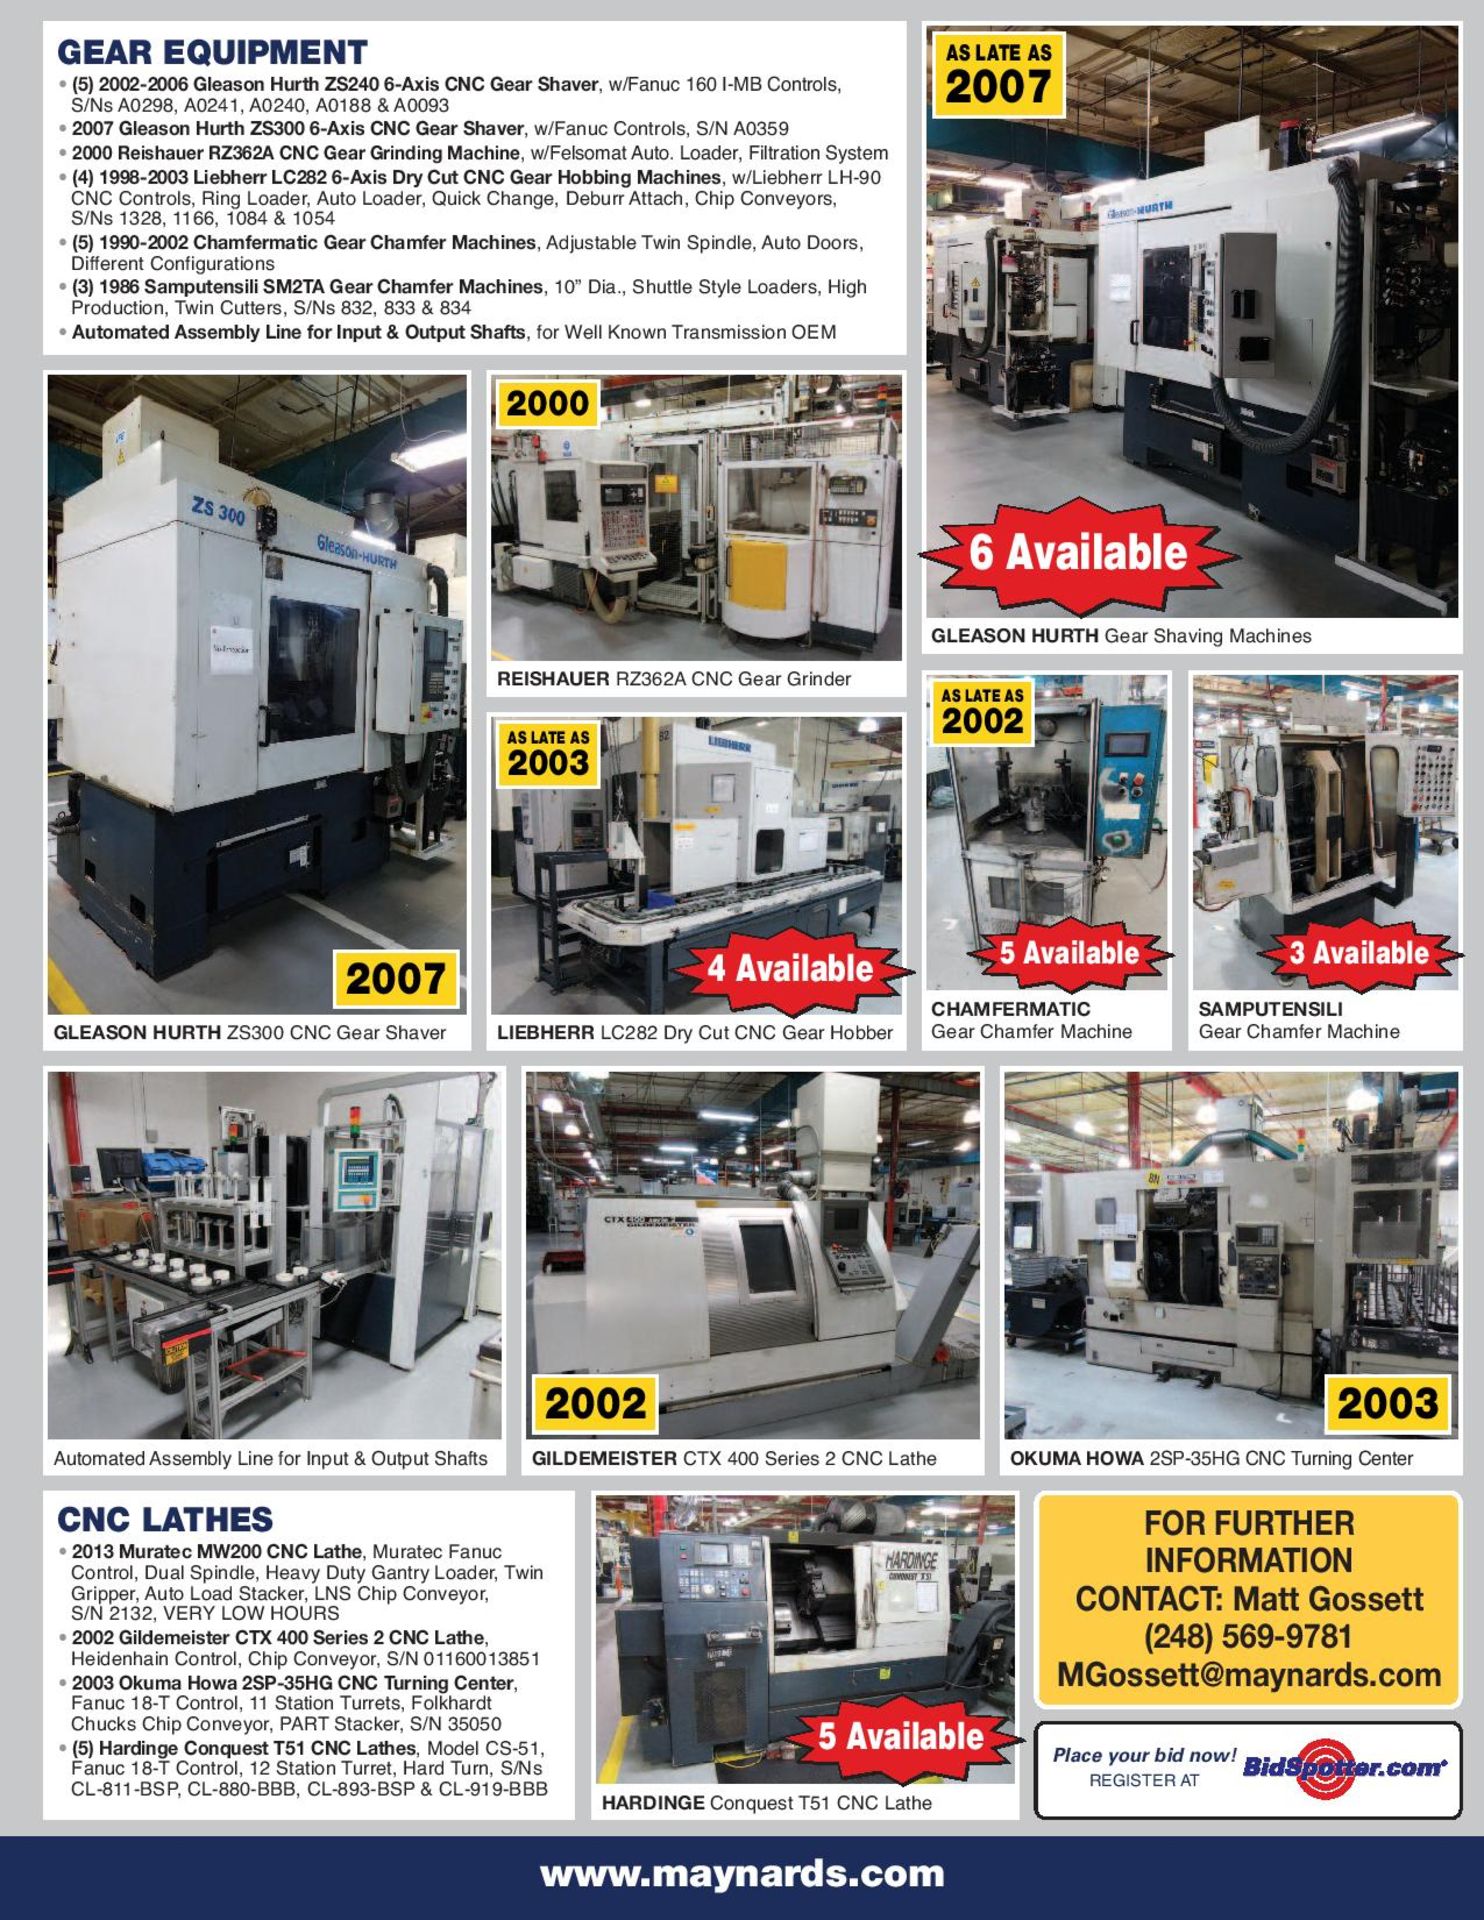 Full Catalog Coming! MAJOR TIER 1 AUTOMOTIVE SUPPLIER - GEAR AND MACHINING MANUFACTURING FACILITY - Image 2 of 4